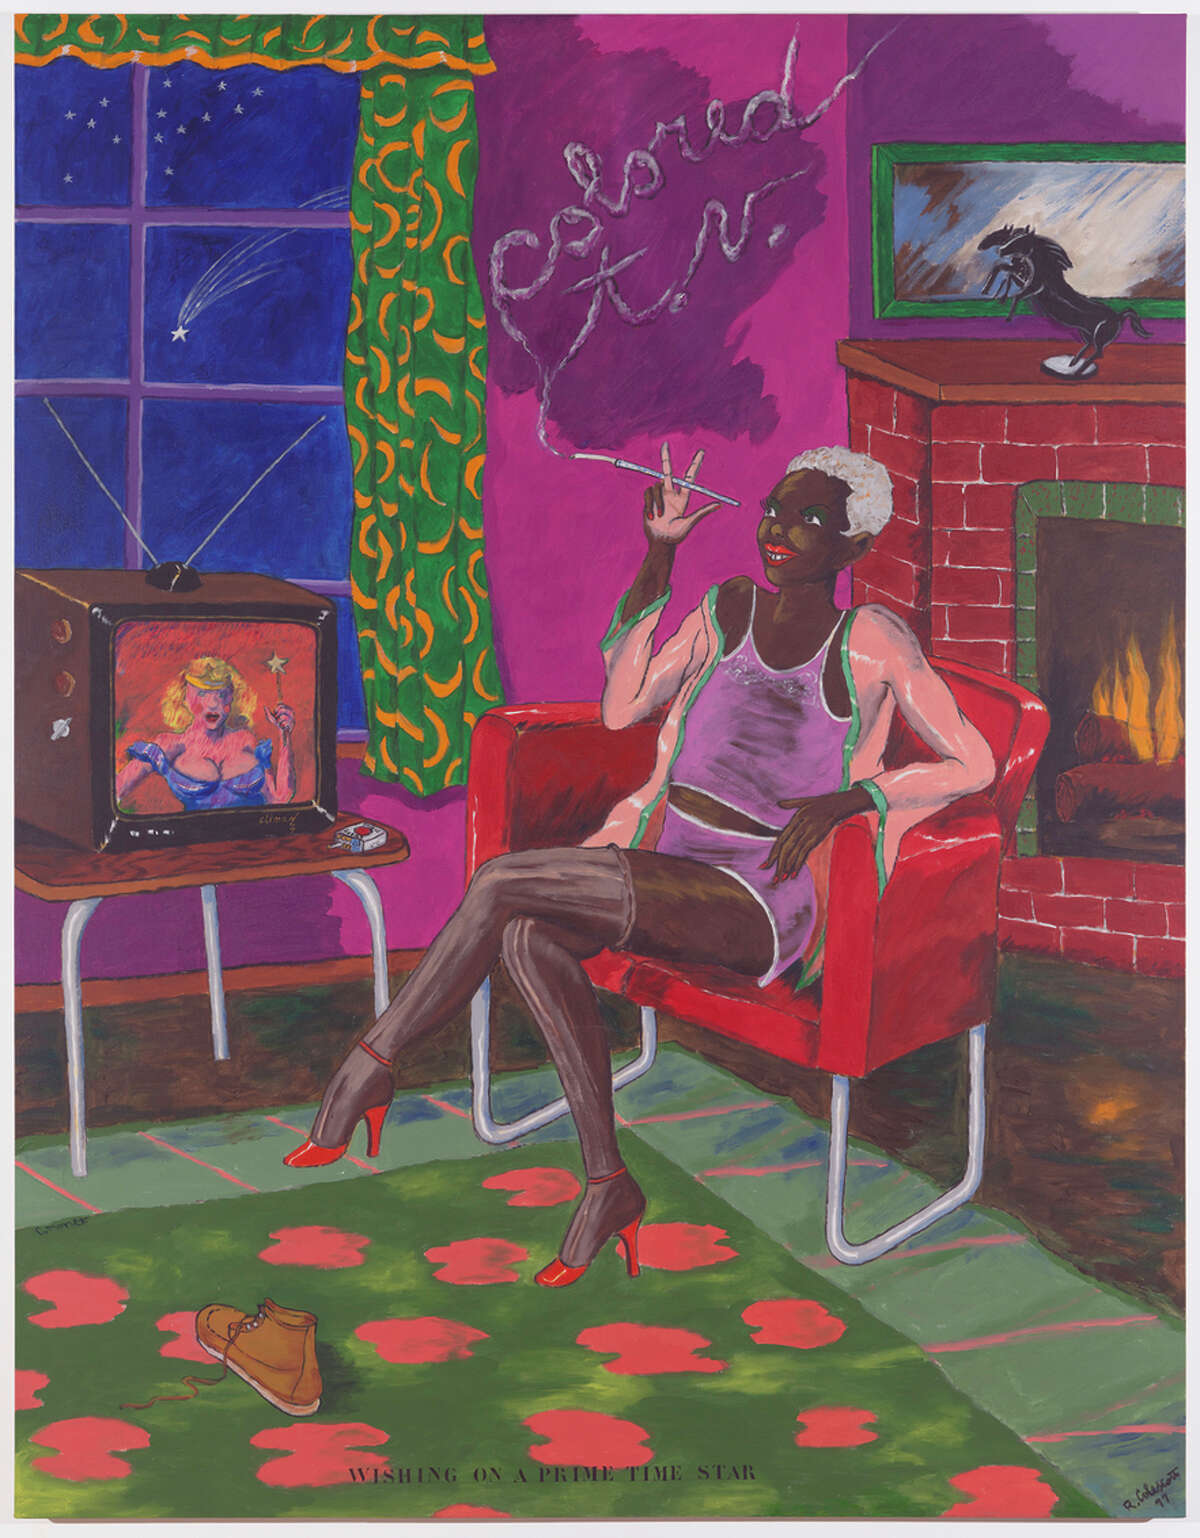 “Colored TV” (1977), left, is an acrylic on canvas by Robert Colescott.